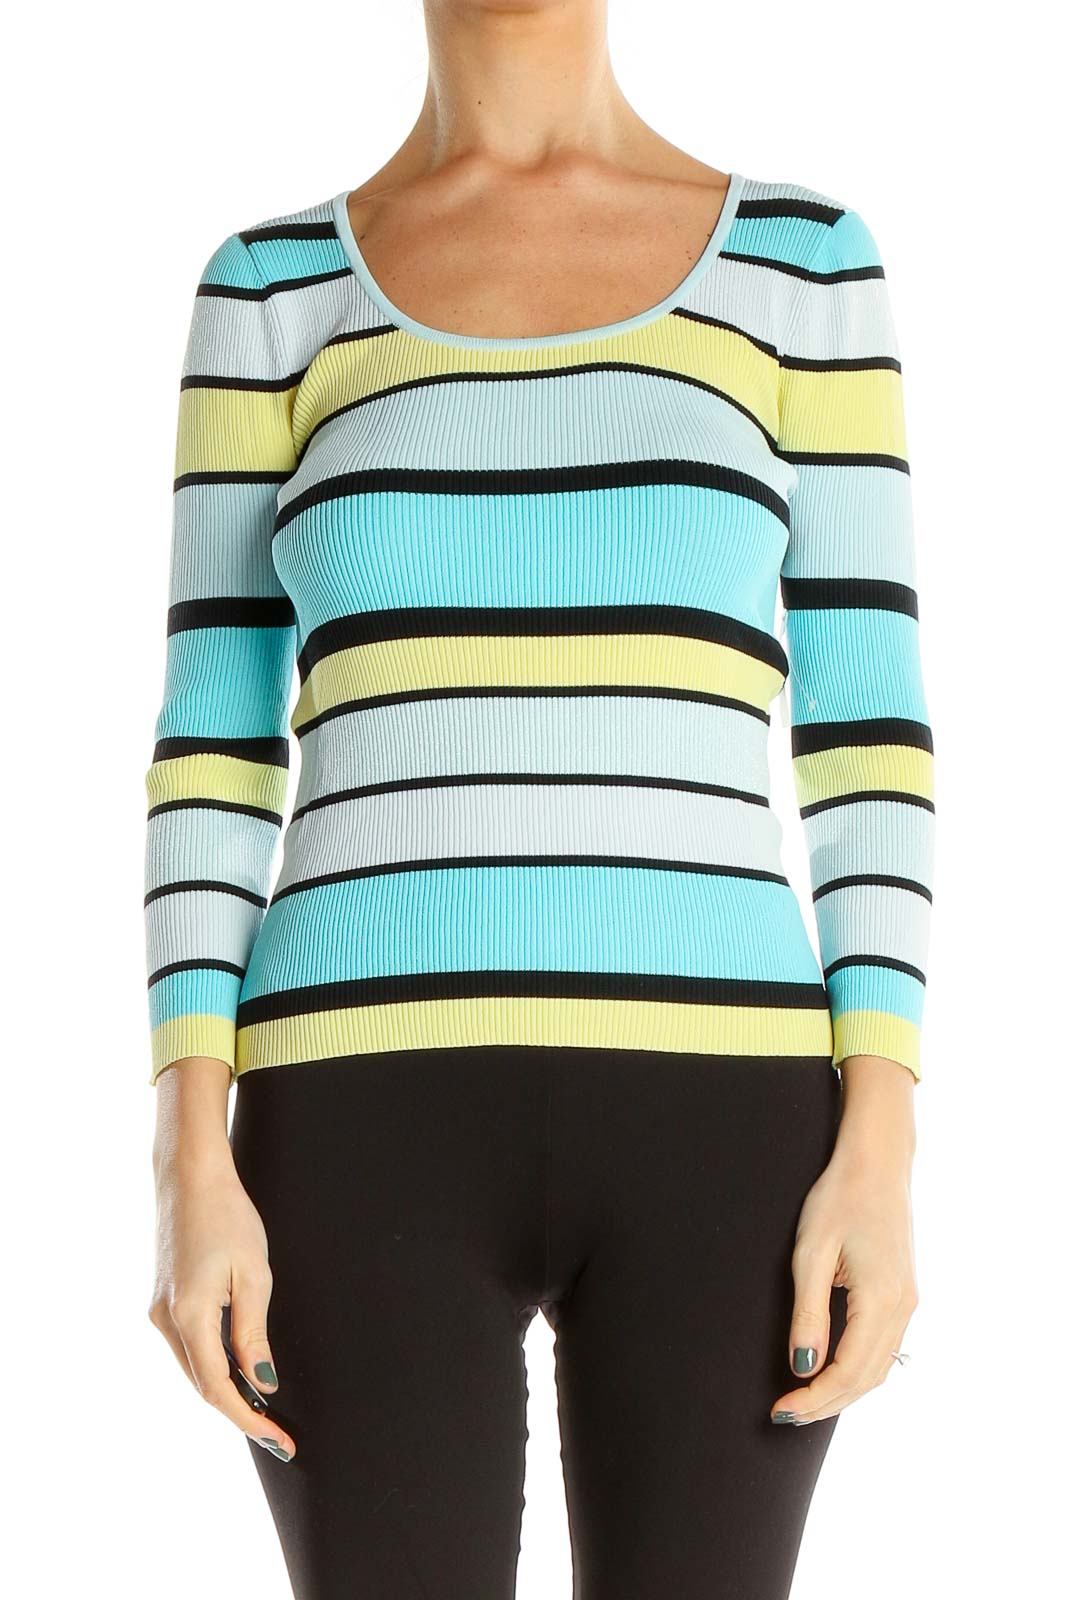 Blue Yellow Striped Ribbed Casual Long Sleeve T-Shirt Front